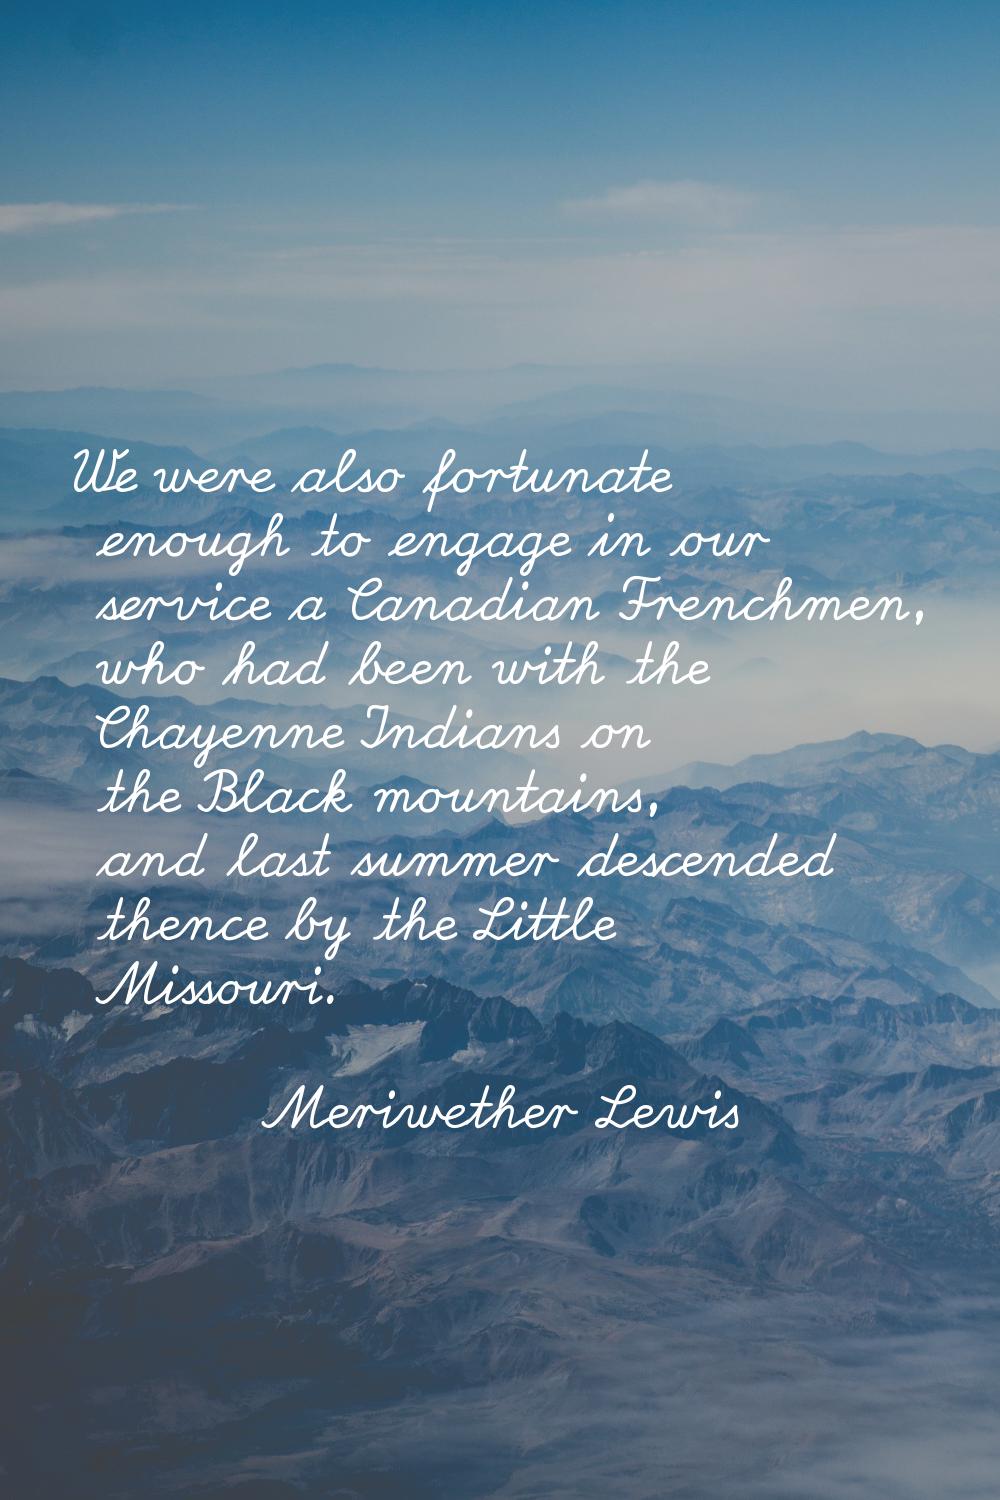 We were also fortunate enough to engage in our service a Canadian Frenchmen, who had been with the 